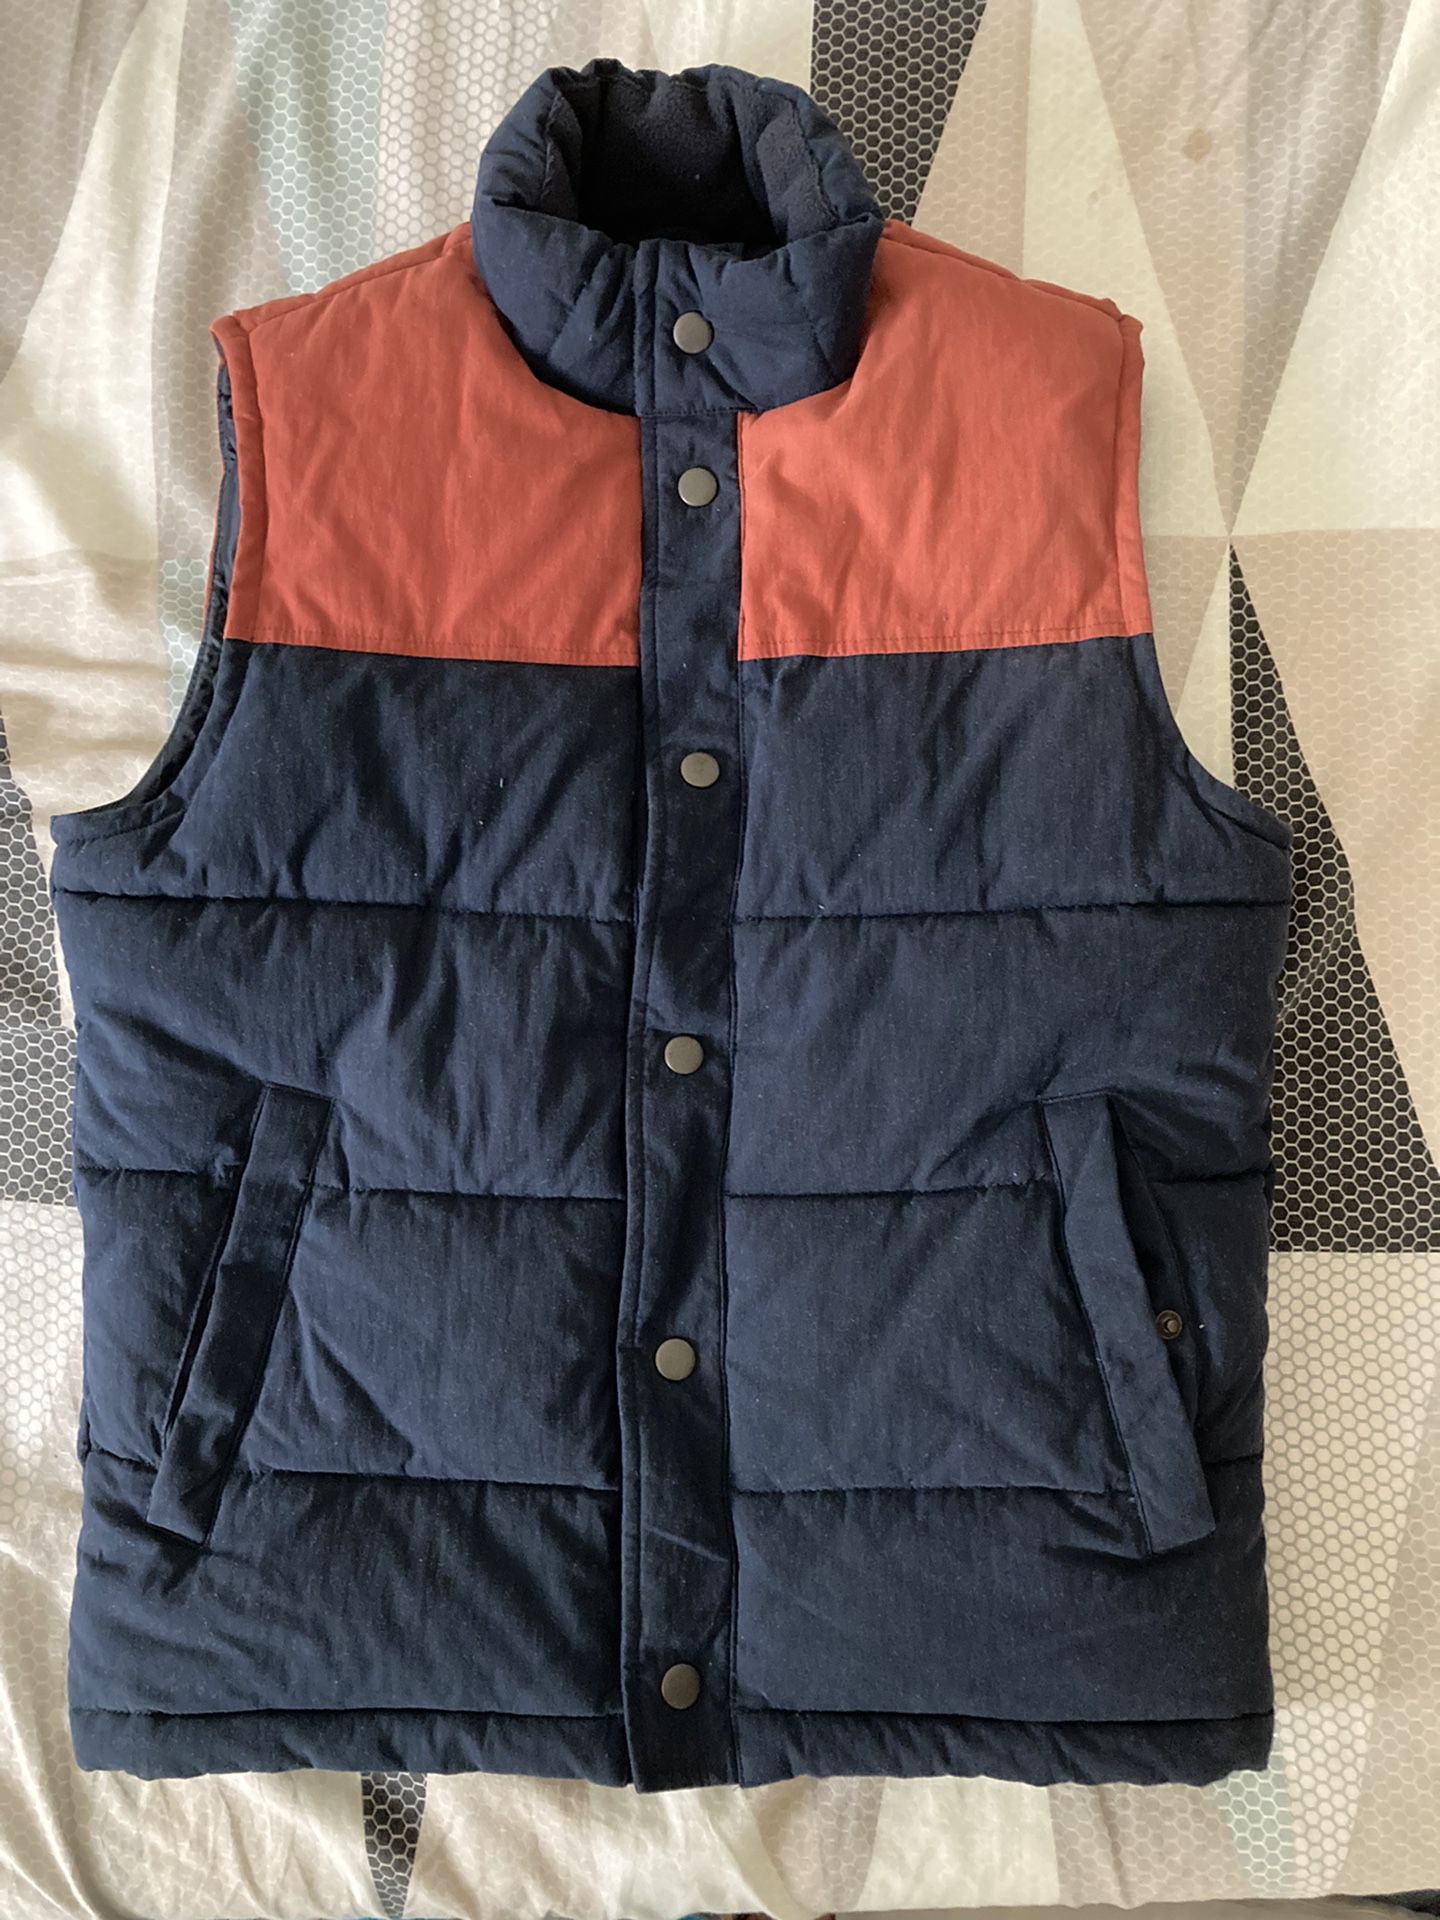 Mens Puffer Vest Small Size. 